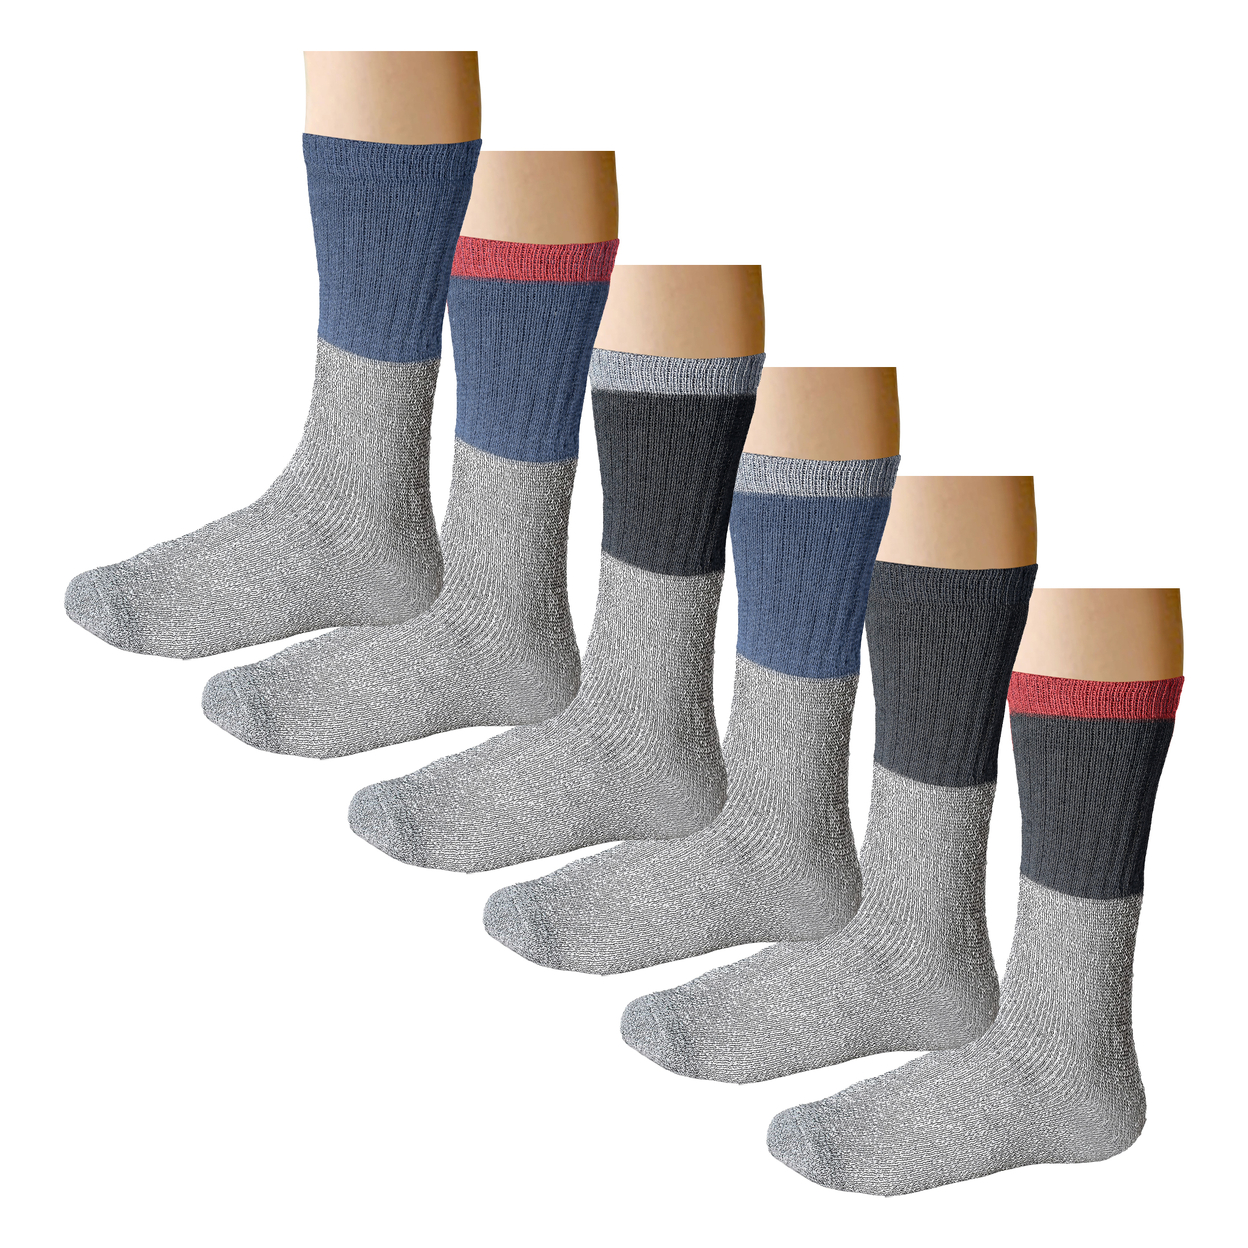 3-Pairs: Women's Winter Warm Thick Heated Cozy Thermal Crew Socks